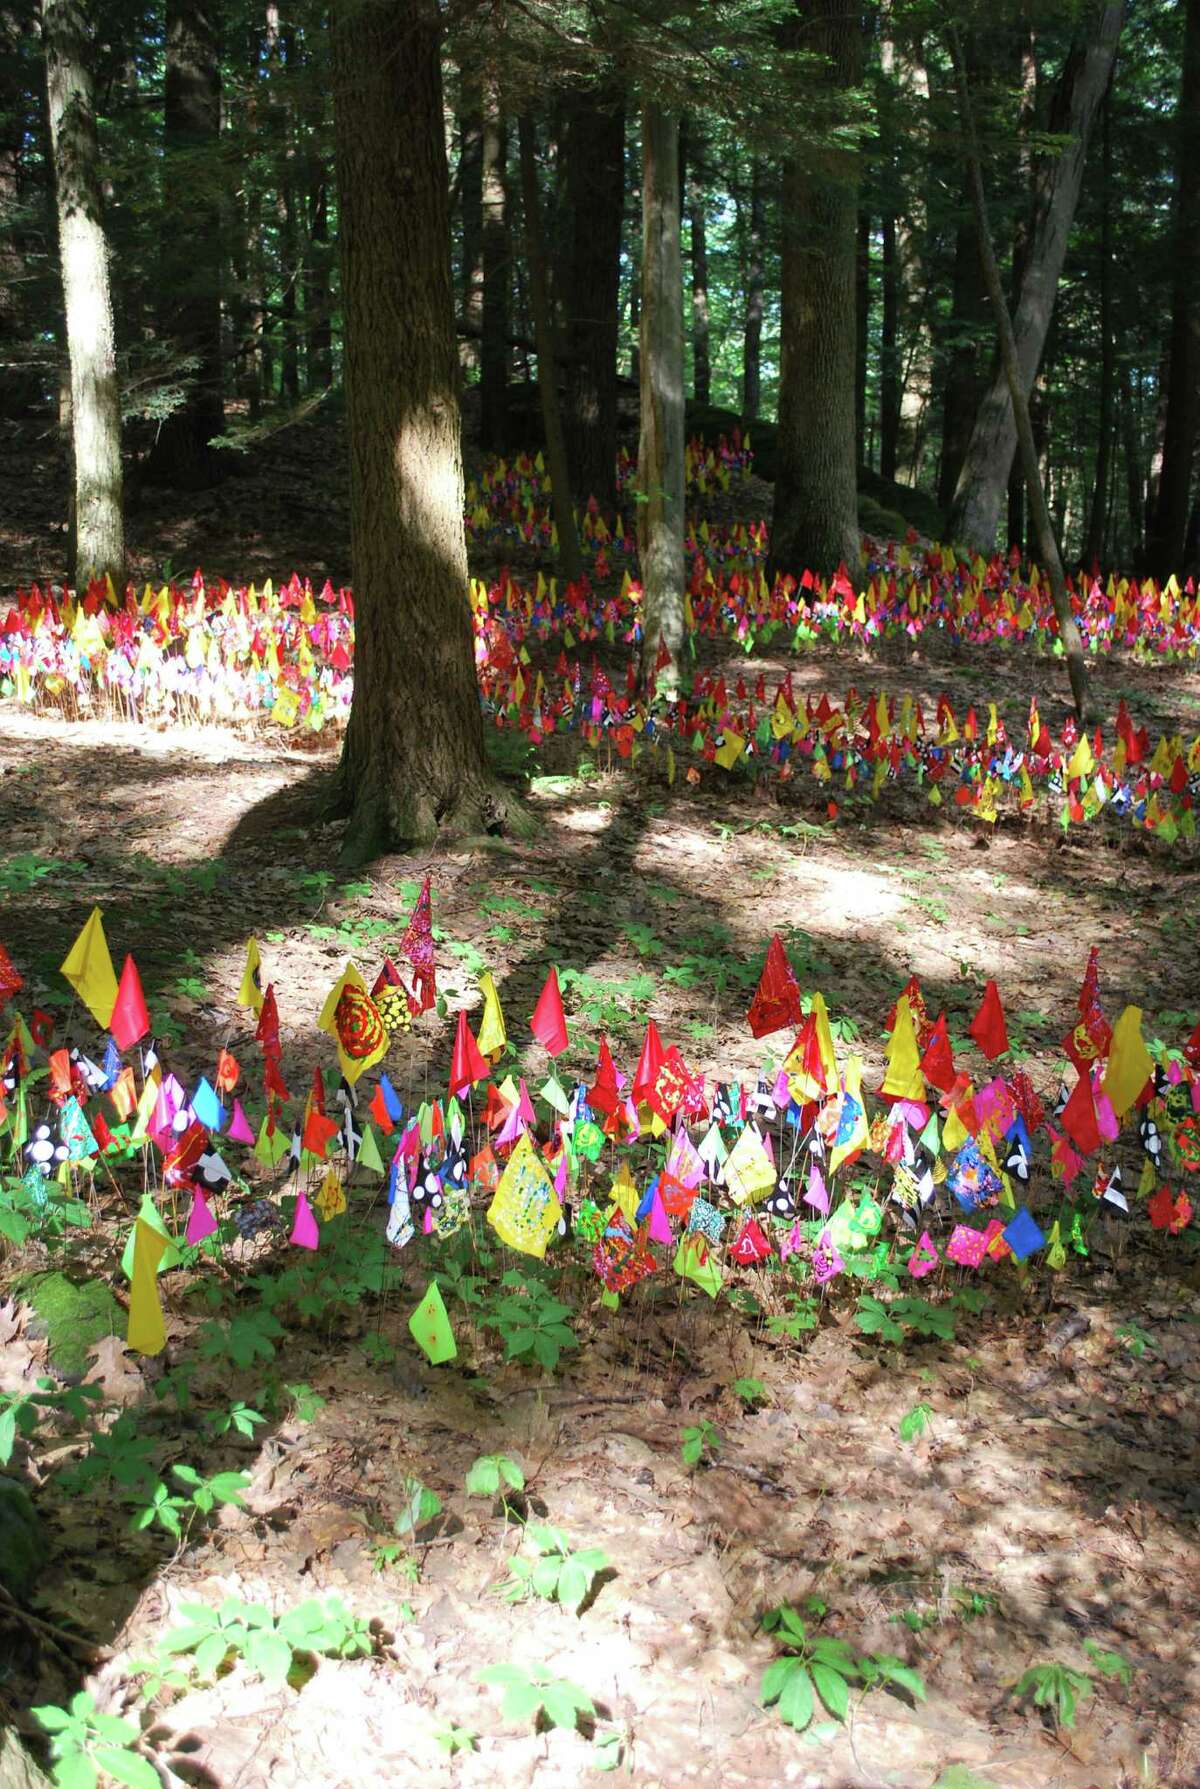 Elizabeth Knowles & William Thielin - Locating is part of "Contemporary Sculpture at Chesterwood, 2013" (Courtesy Chesterwood)